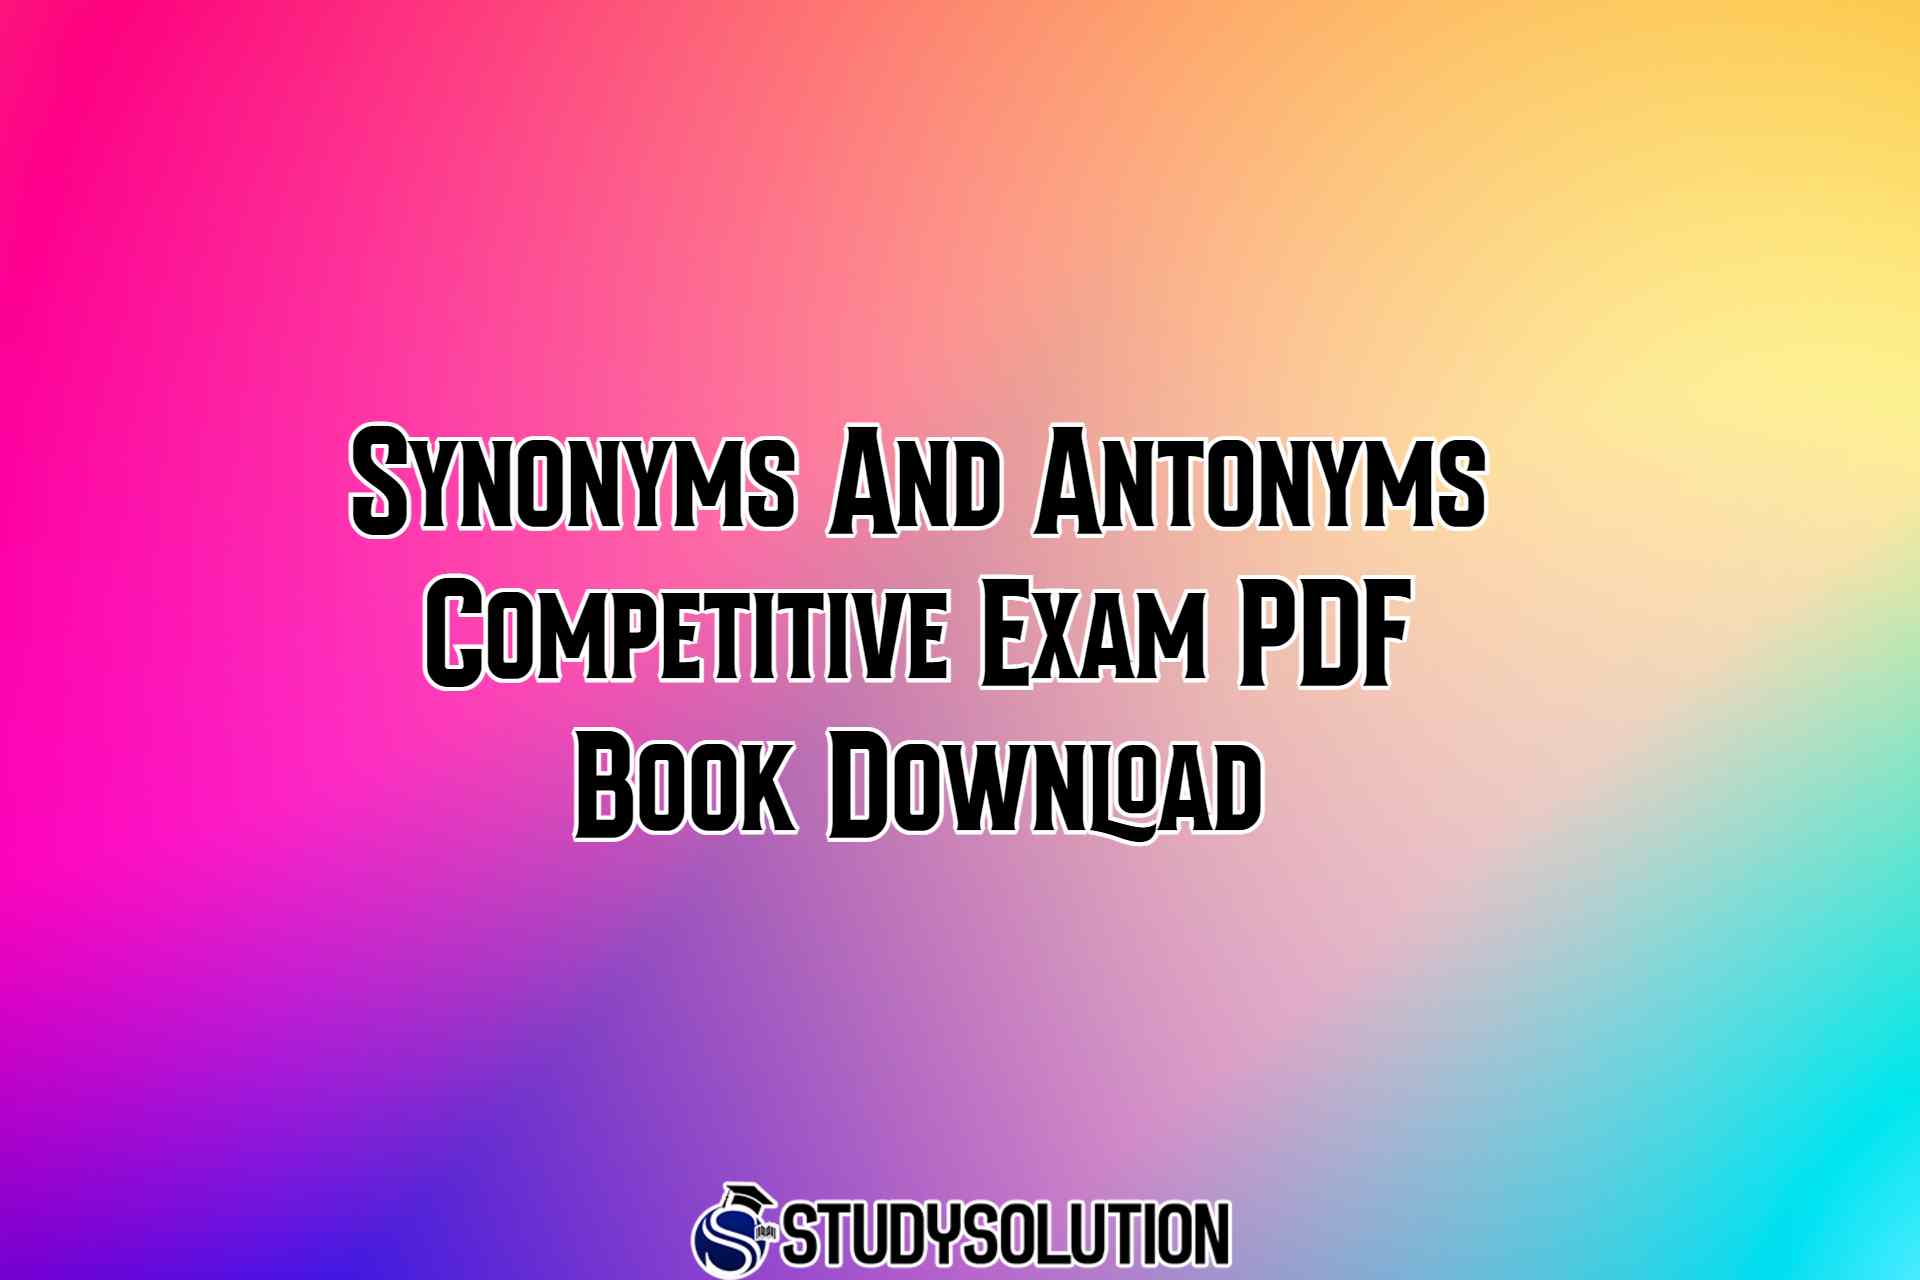 Synonyms And Antonyms Competitive Exam PDF Book Download